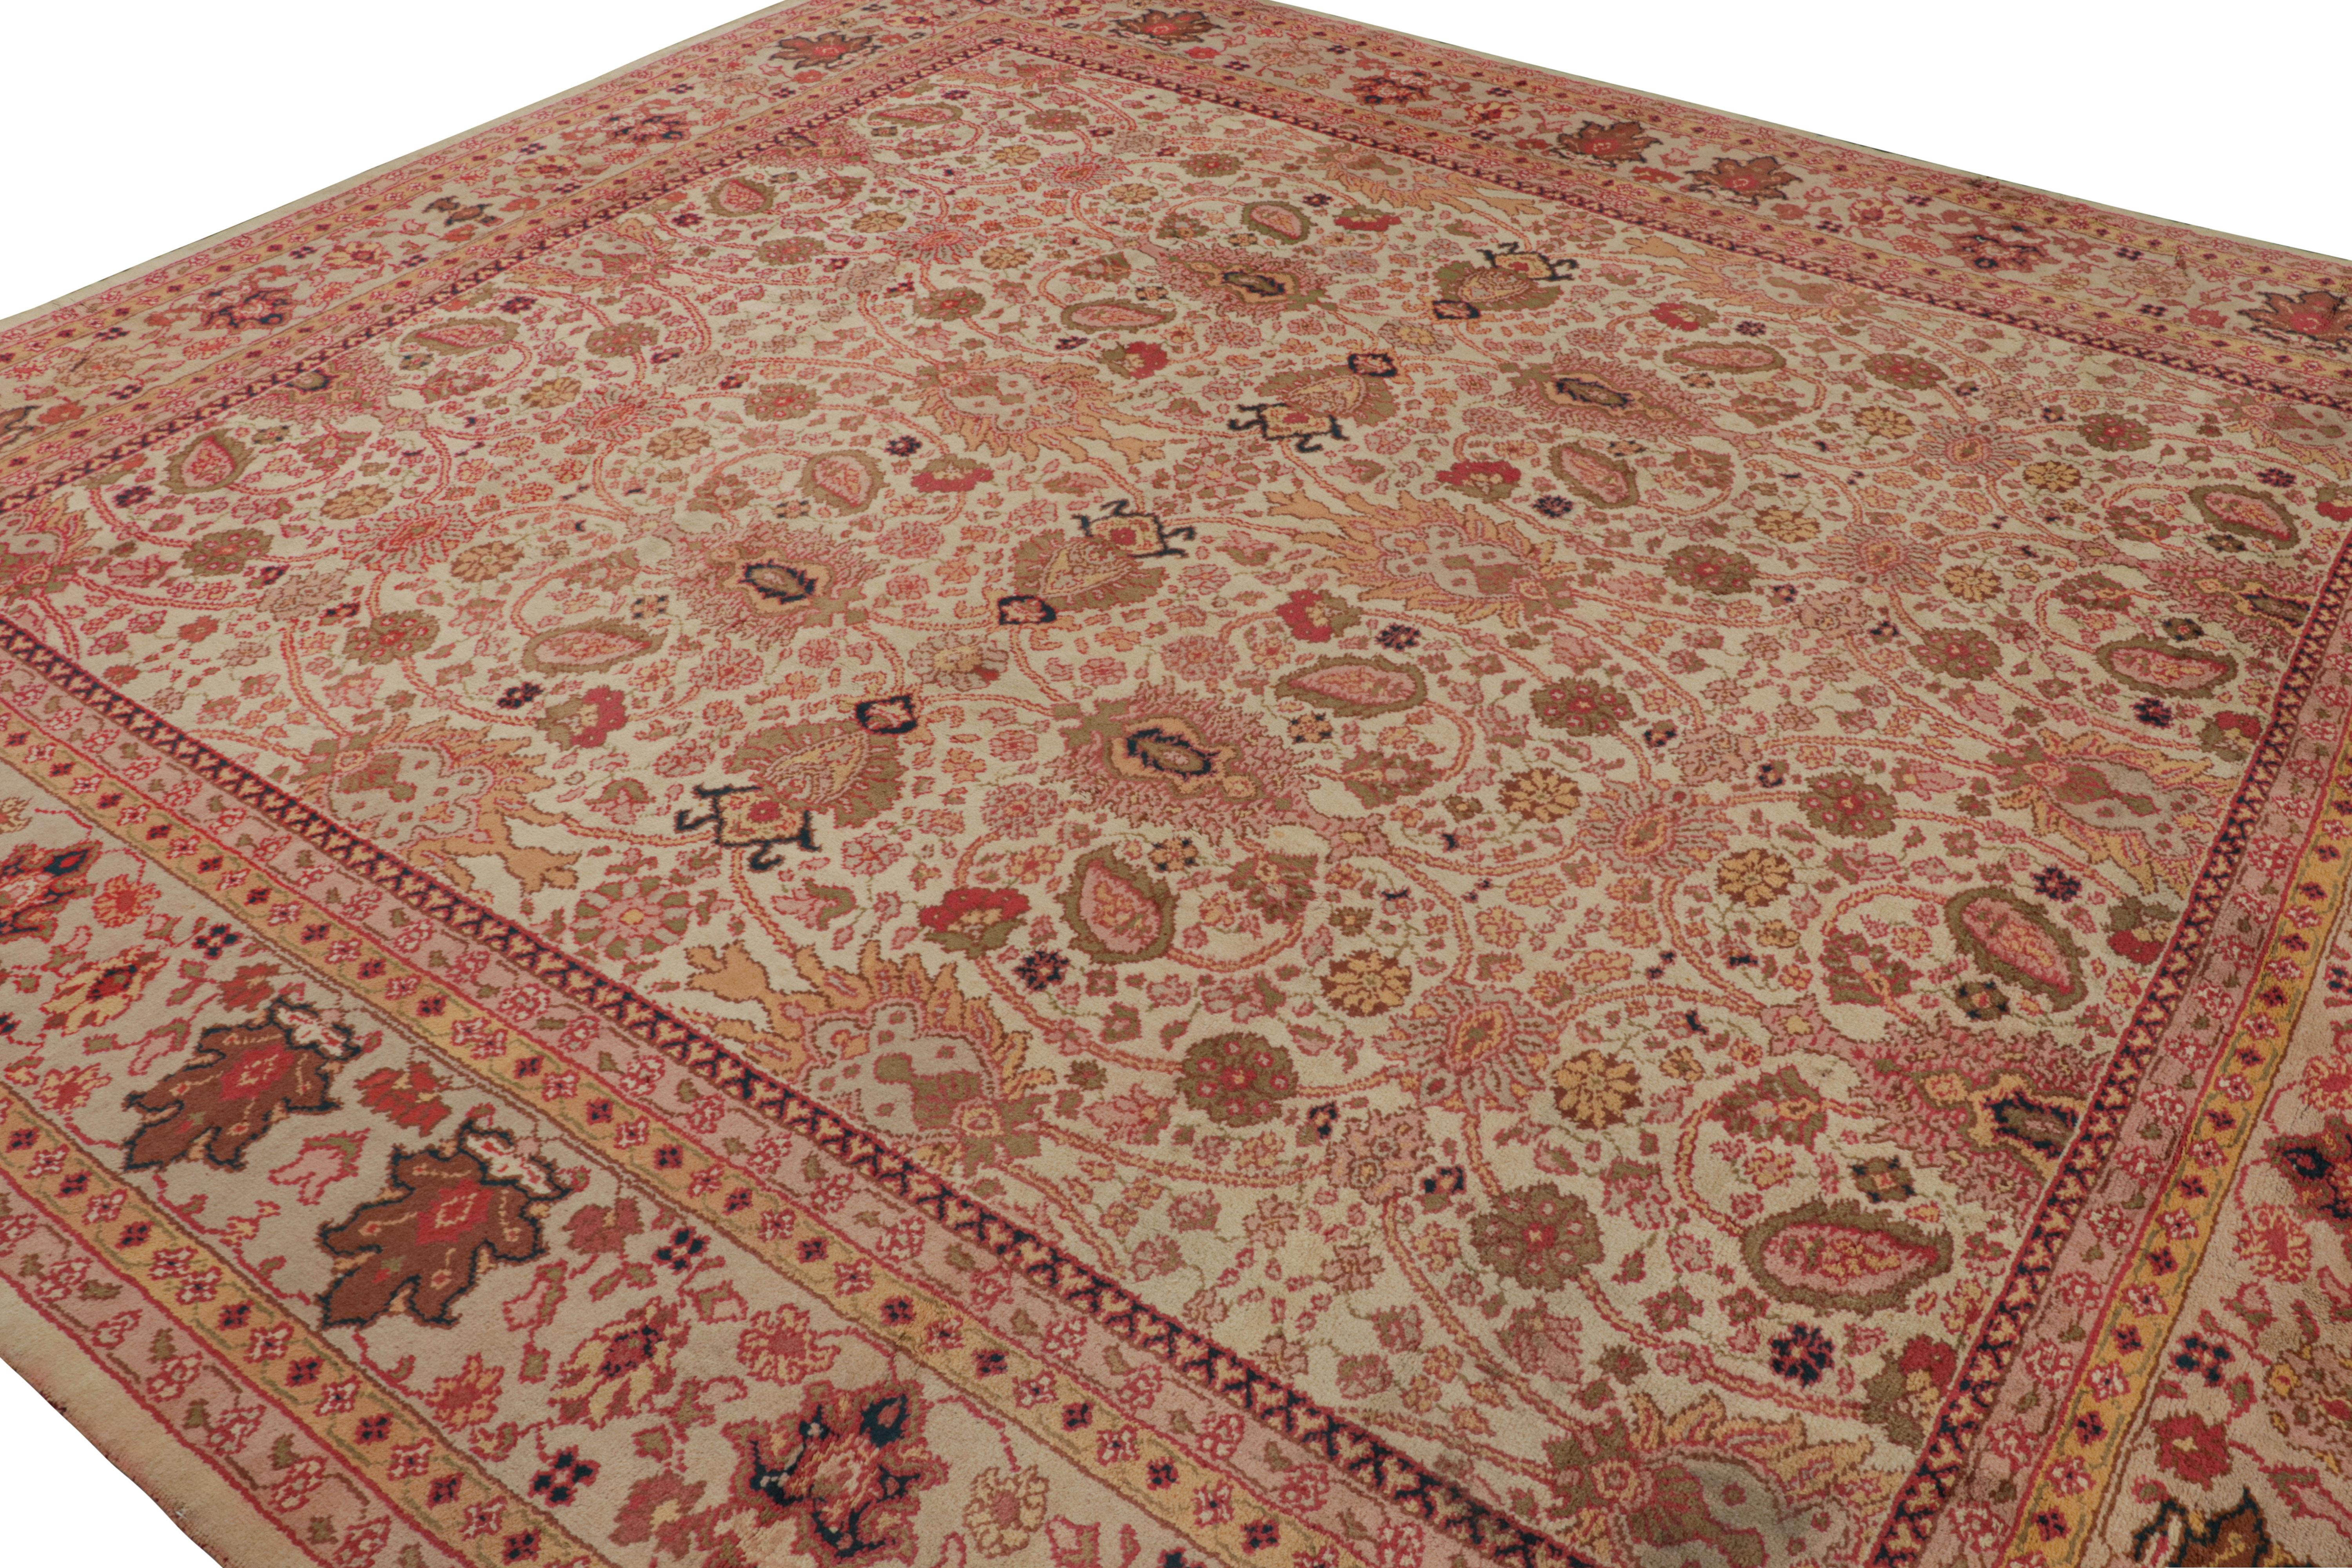 Hand-knotted in wool circa 1910-1920, an antique 11x13 arts & crafts rug - latest to join our European rug collection.

On the Design:

Likely to be English by origin, this antique arts and crafts rug enjoys a very elegant aesthetic appeal. Keen